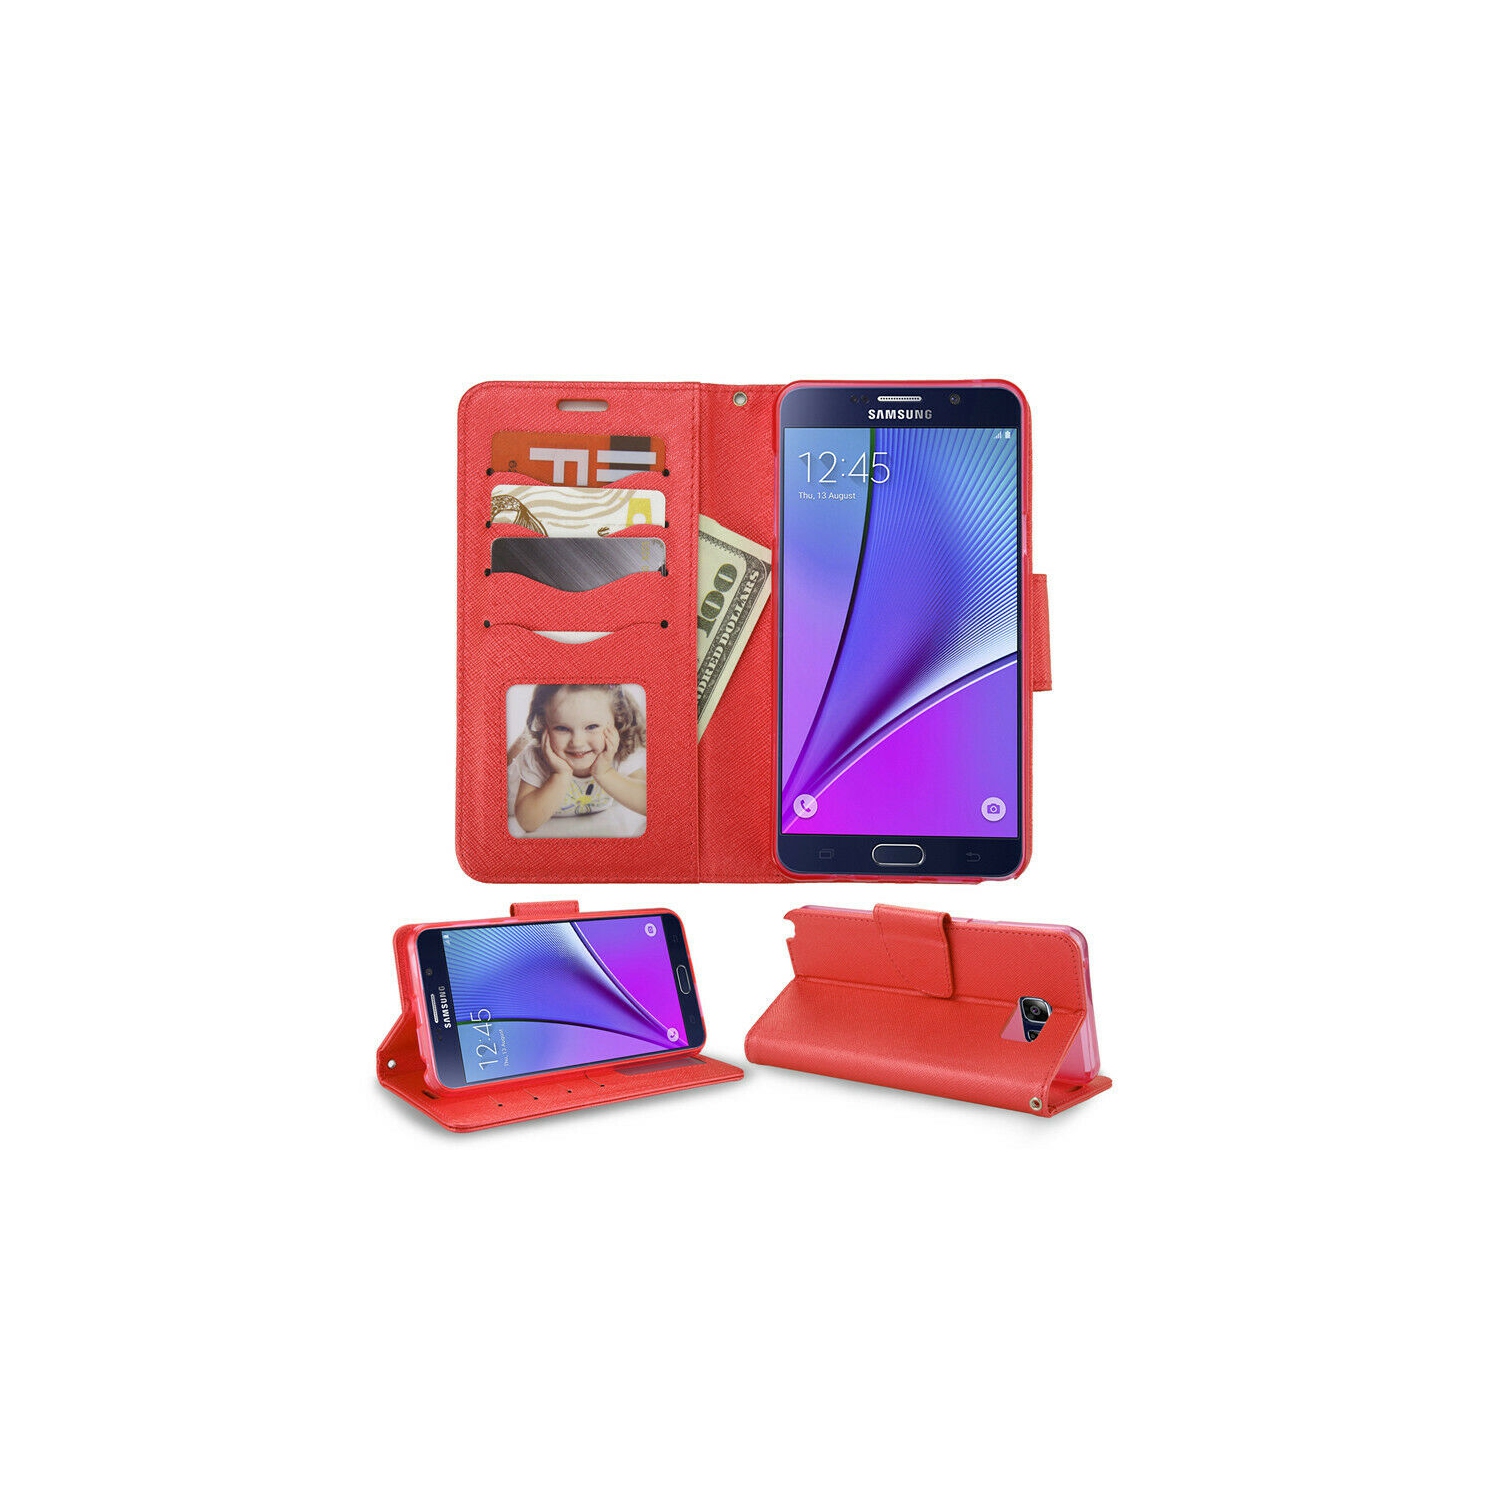 【CSmart】 Magnetic Card Slot Leather Folio Wallet Flip Case Cover for Samsung Galaxy Note 5, Red